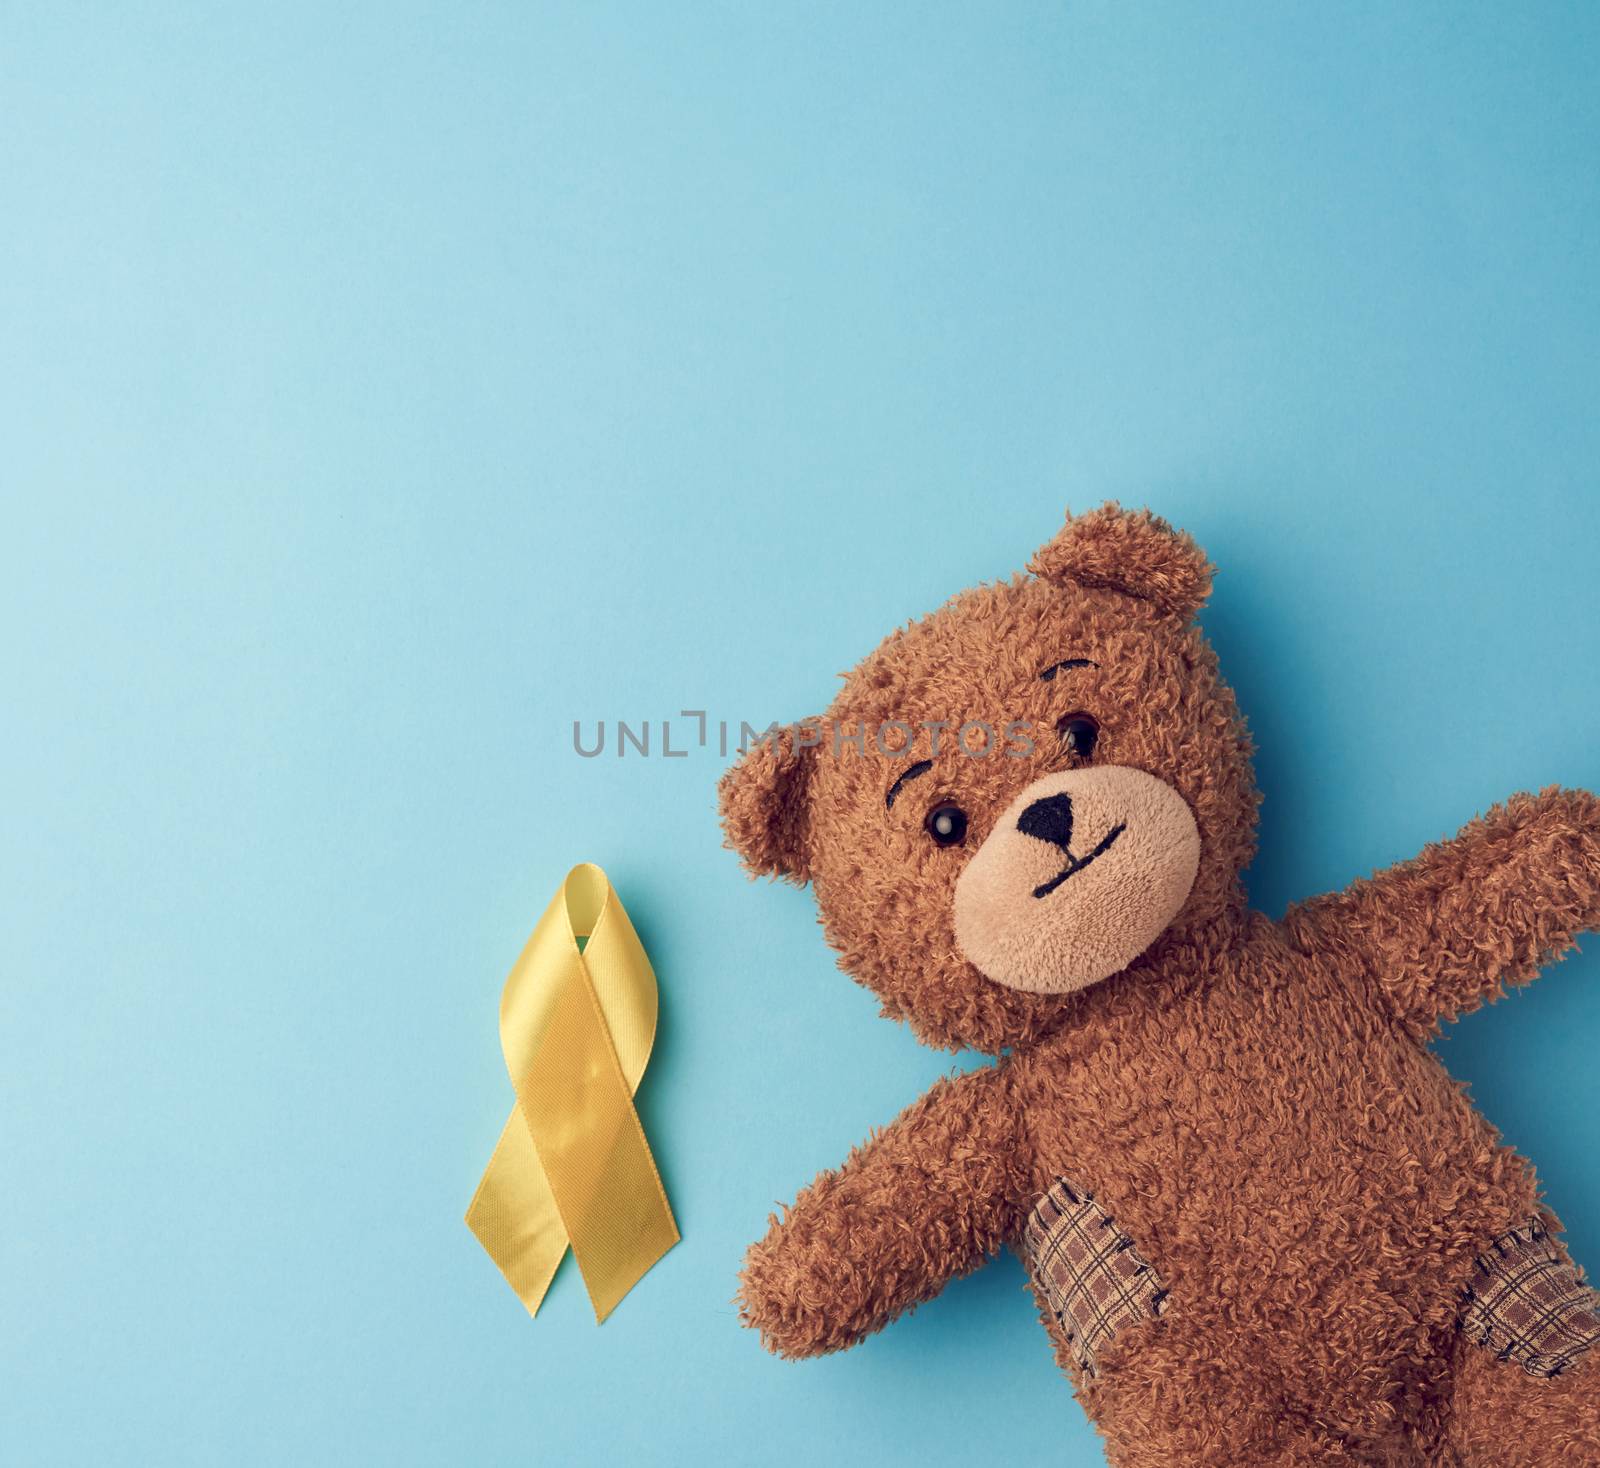 brown teddy bear holds in his paw a yellow ribbon folded in a loop on a blue background. concept of the fight against childhood cancer. problem of suicides and their prevention. copy space